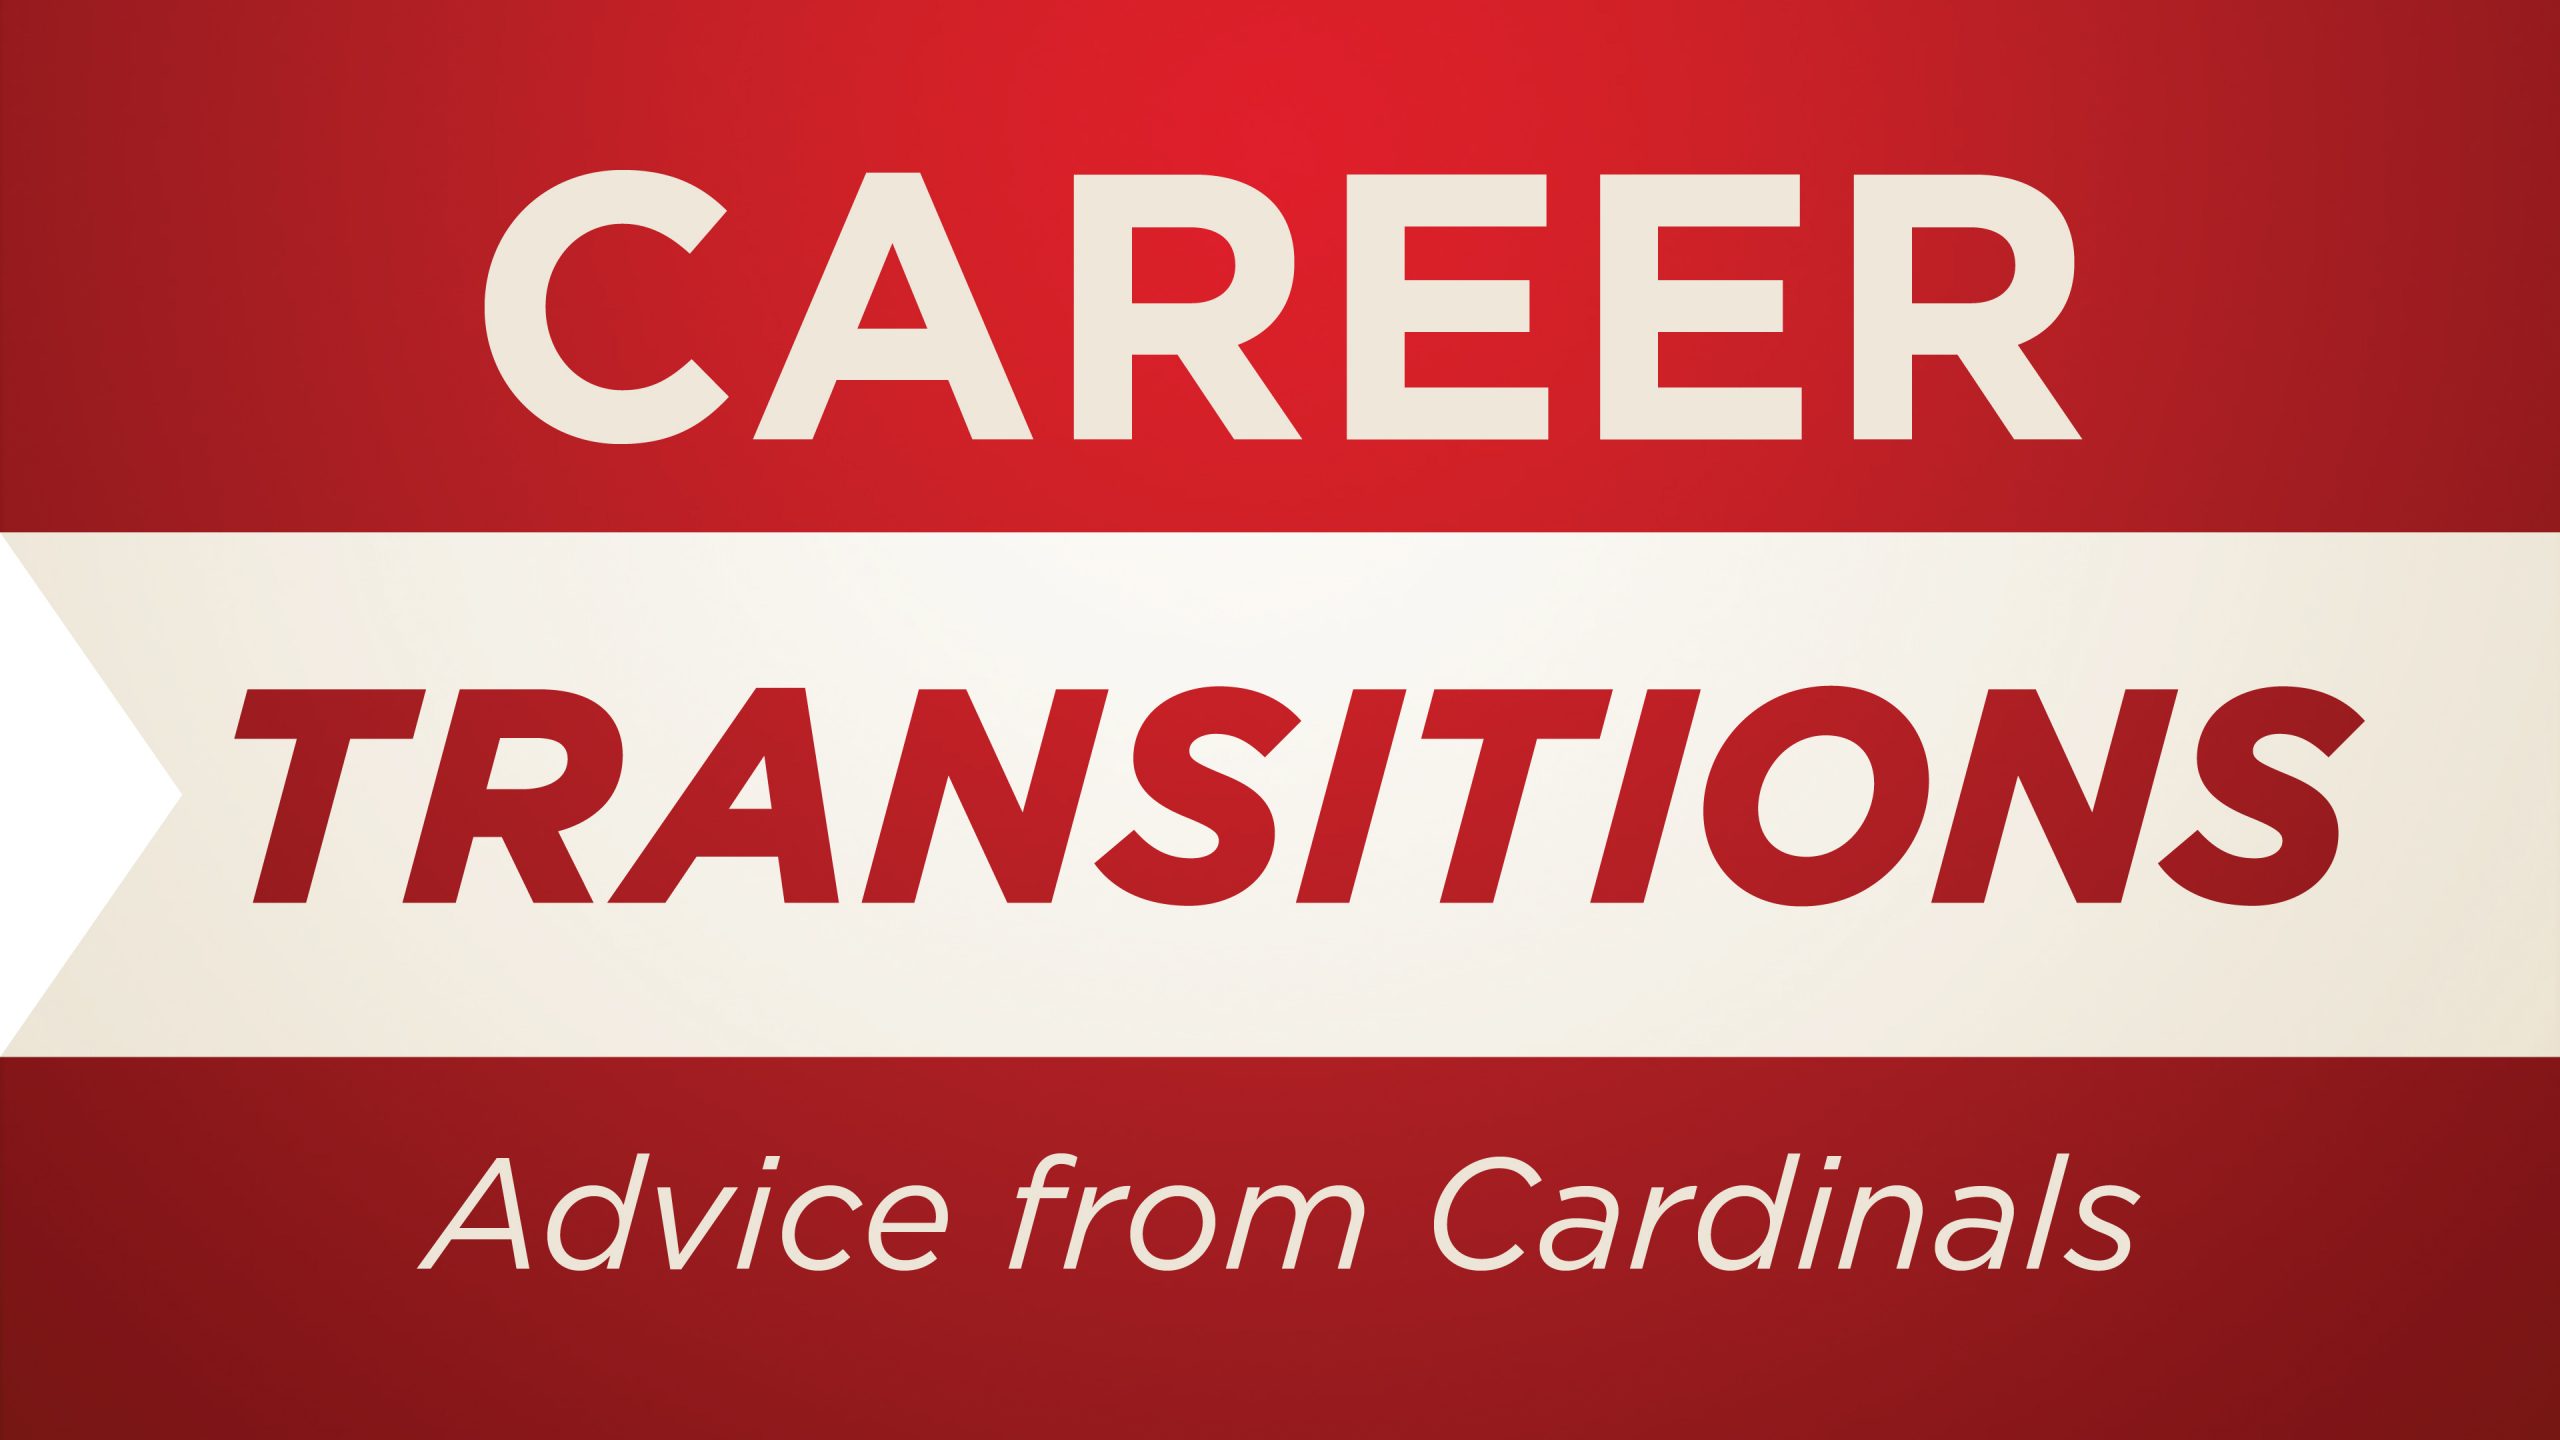 Careertransitions Title